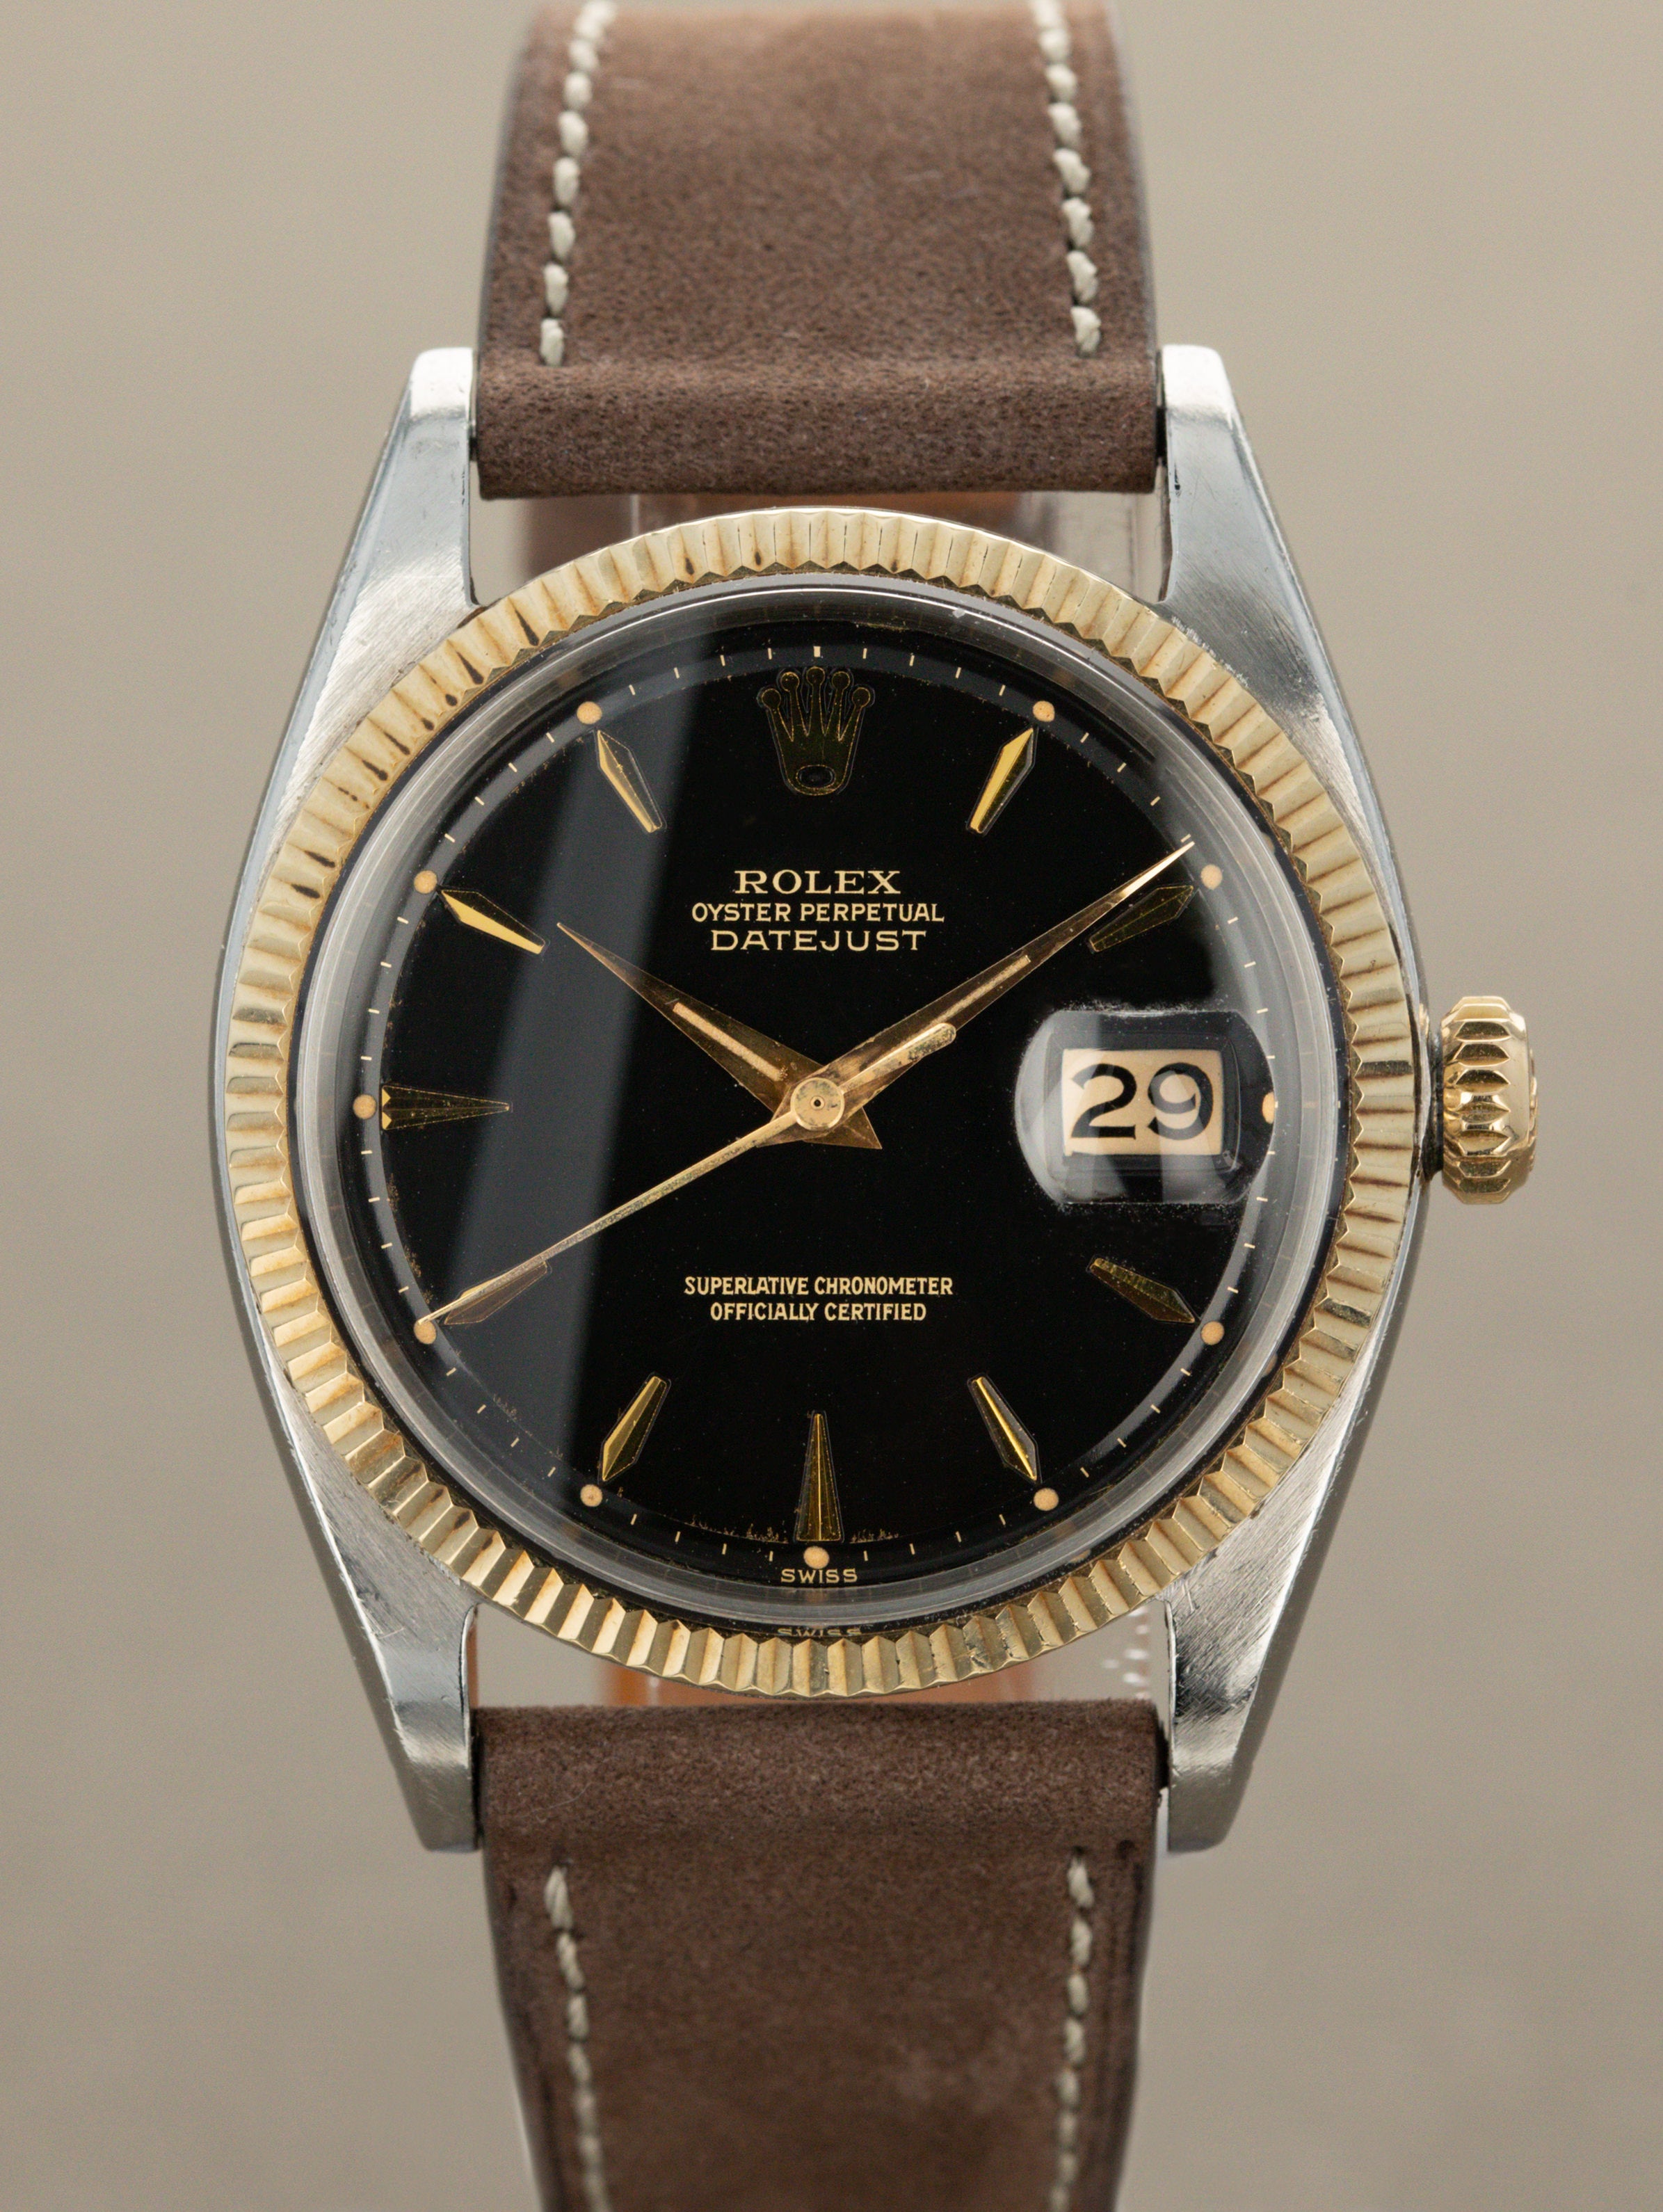 Rolex Datejust Ref. 1601 - Black Gilt Dial with Papers